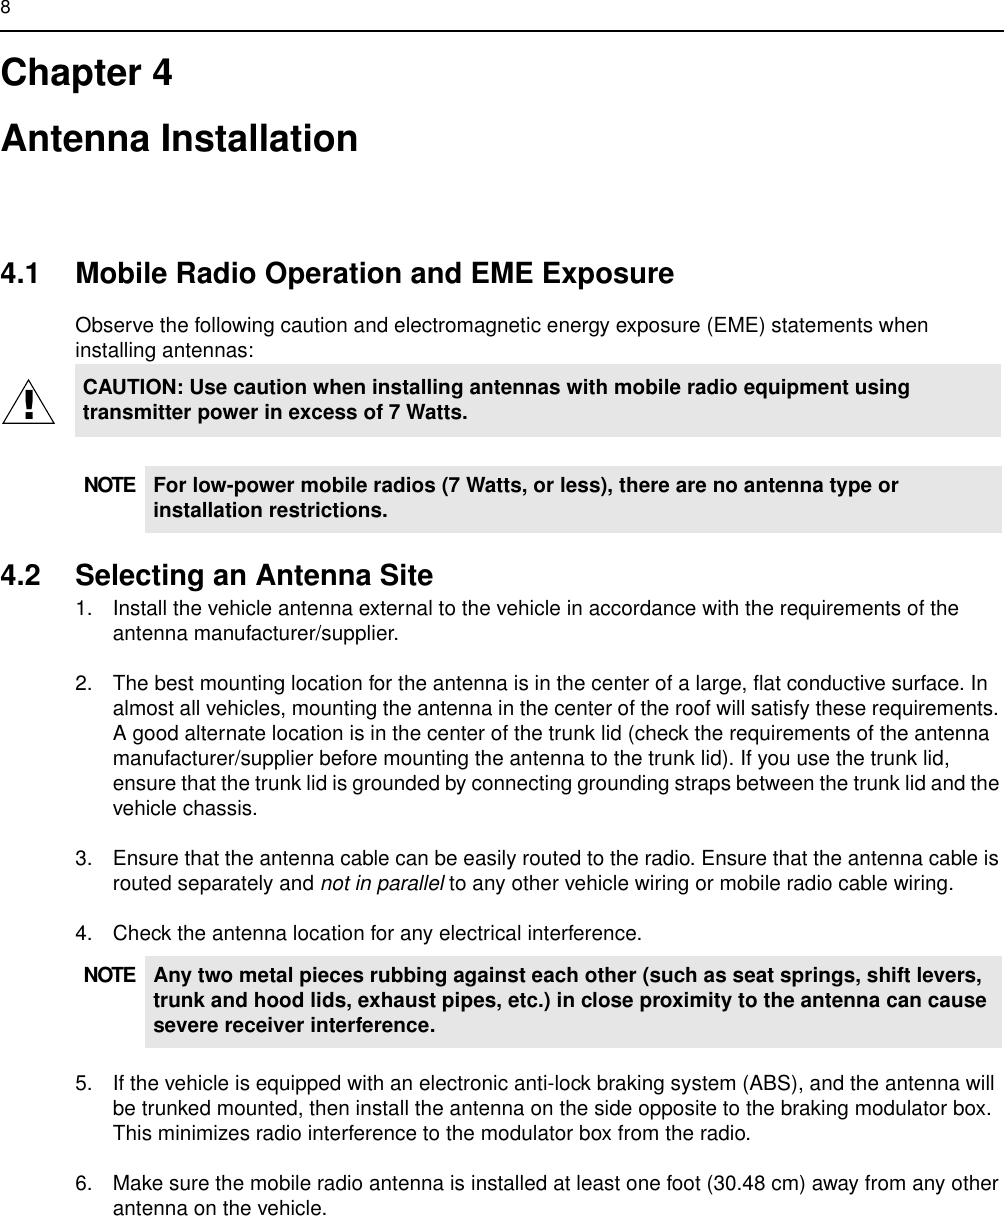 8Chapter 4Antenna Installation4.1 Mobile Radio Operation and EME ExposureObserve the following caution and electromagnetic energy exposure (EME) statements when installing antennas:4.2 Selecting an Antenna Site1. Install the vehicle antenna external to the vehicle in accordance with the requirements of the antenna manufacturer/supplier.2. The best mounting location for the antenna is in the center of a large, flat conductive surface. In almost all vehicles, mounting the antenna in the center of the roof will satisfy these requirements. A good alternate location is in the center of the trunk lid (check the requirements of the antenna manufacturer/supplier before mounting the antenna to the trunk lid). If you use the trunk lid, ensure that the trunk lid is grounded by connecting grounding straps between the trunk lid and the vehicle chassis.3. Ensure that the antenna cable can be easily routed to the radio. Ensure that the antenna cable is routed separately and not in parallel to any other vehicle wiring or mobile radio cable wiring.4. Check the antenna location for any electrical interference.5. If the vehicle is equipped with an electronic anti-lock braking system (ABS), and the antenna will be trunked mounted, then install the antenna on the side opposite to the braking modulator box. This minimizes radio interference to the modulator box from the radio.6. Make sure the mobile radio antenna is installed at least one foot (30.48 cm) away from any other antenna on the vehicle.CAUTION: Use caution when installing antennas with mobile radio equipment using transmitter power in excess of 7 Watts.NOTE For low-power mobile radios (7 Watts, or less), there are no antenna type or installation restrictions.NOTE Any two metal pieces rubbing against each other (such as seat springs, shift levers, trunk and hood lids, exhaust pipes, etc.) in close proximity to the antenna can cause severe receiver interference.!